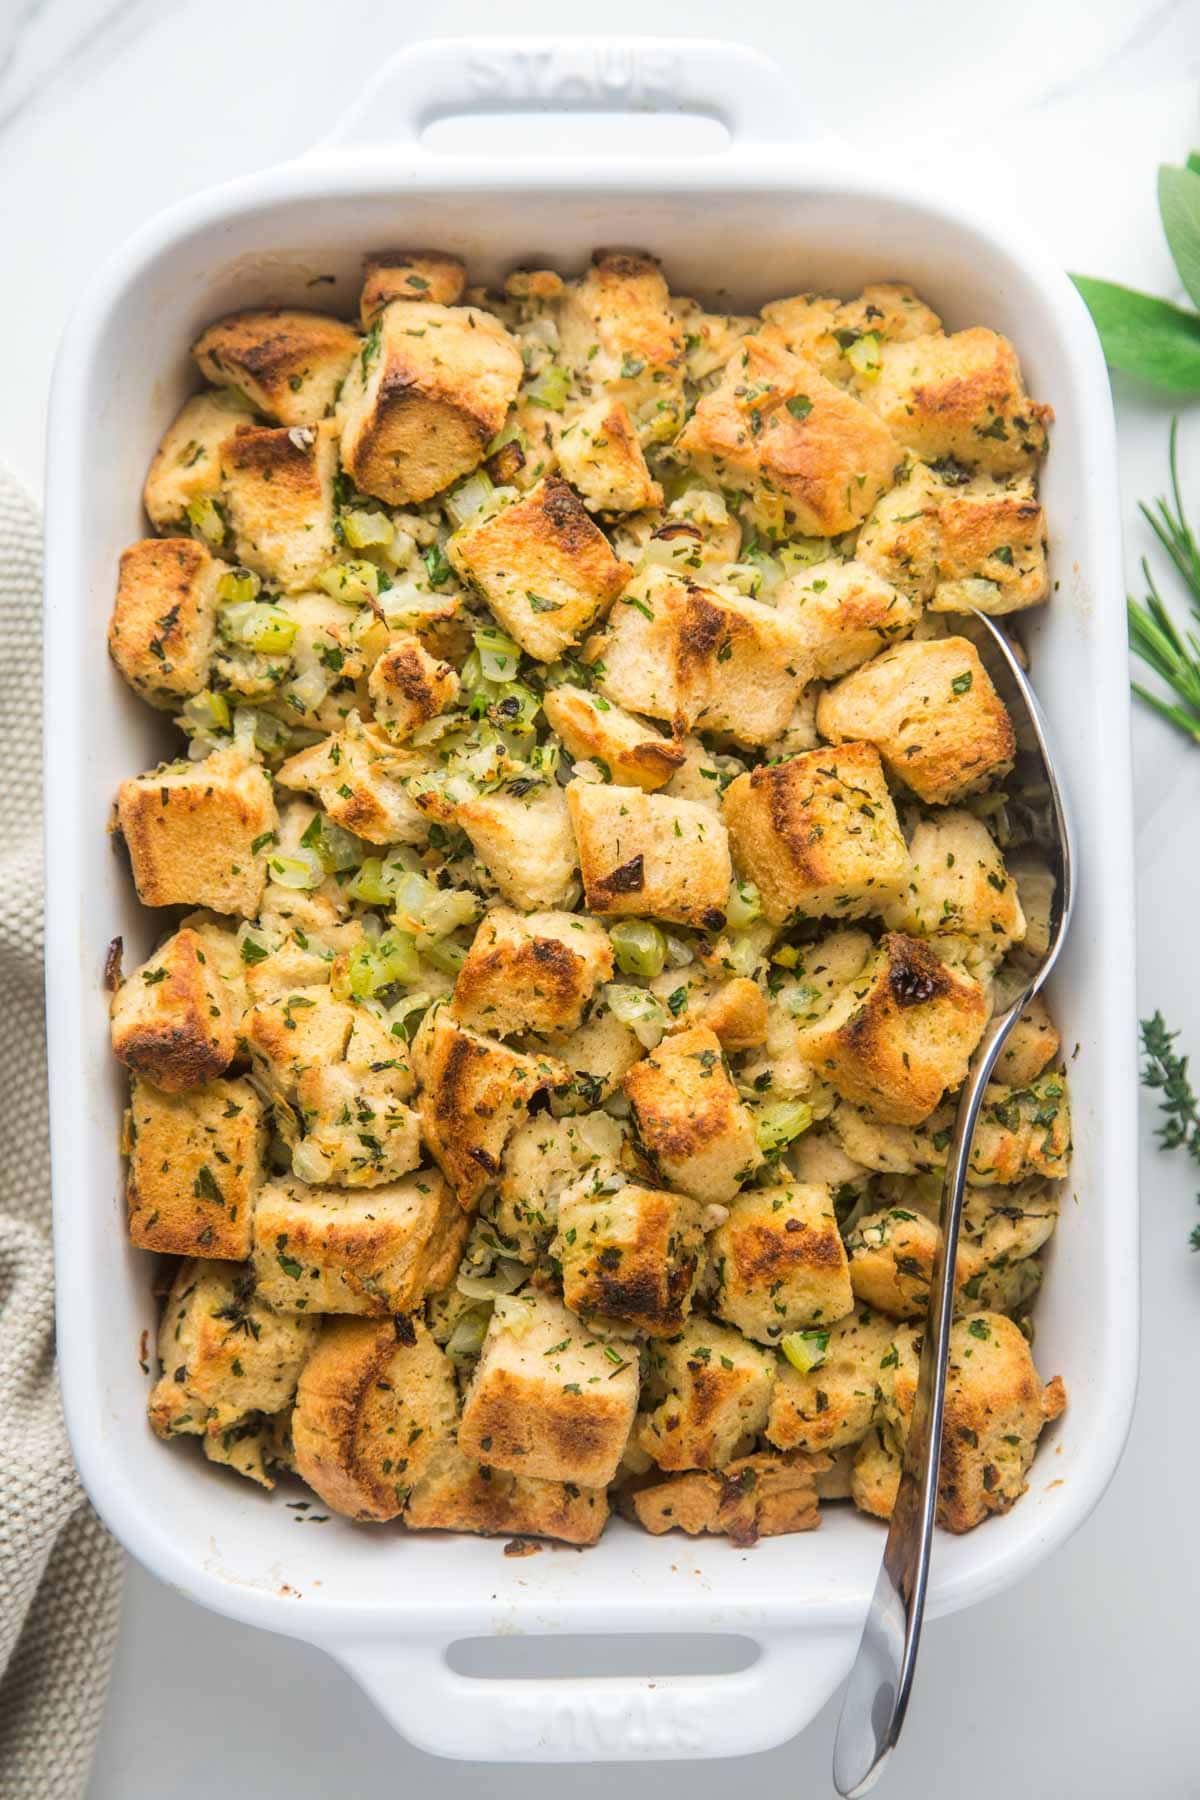 Classic stuffing in a white Staub ceramic dish, with a serving spoon - overhead shot